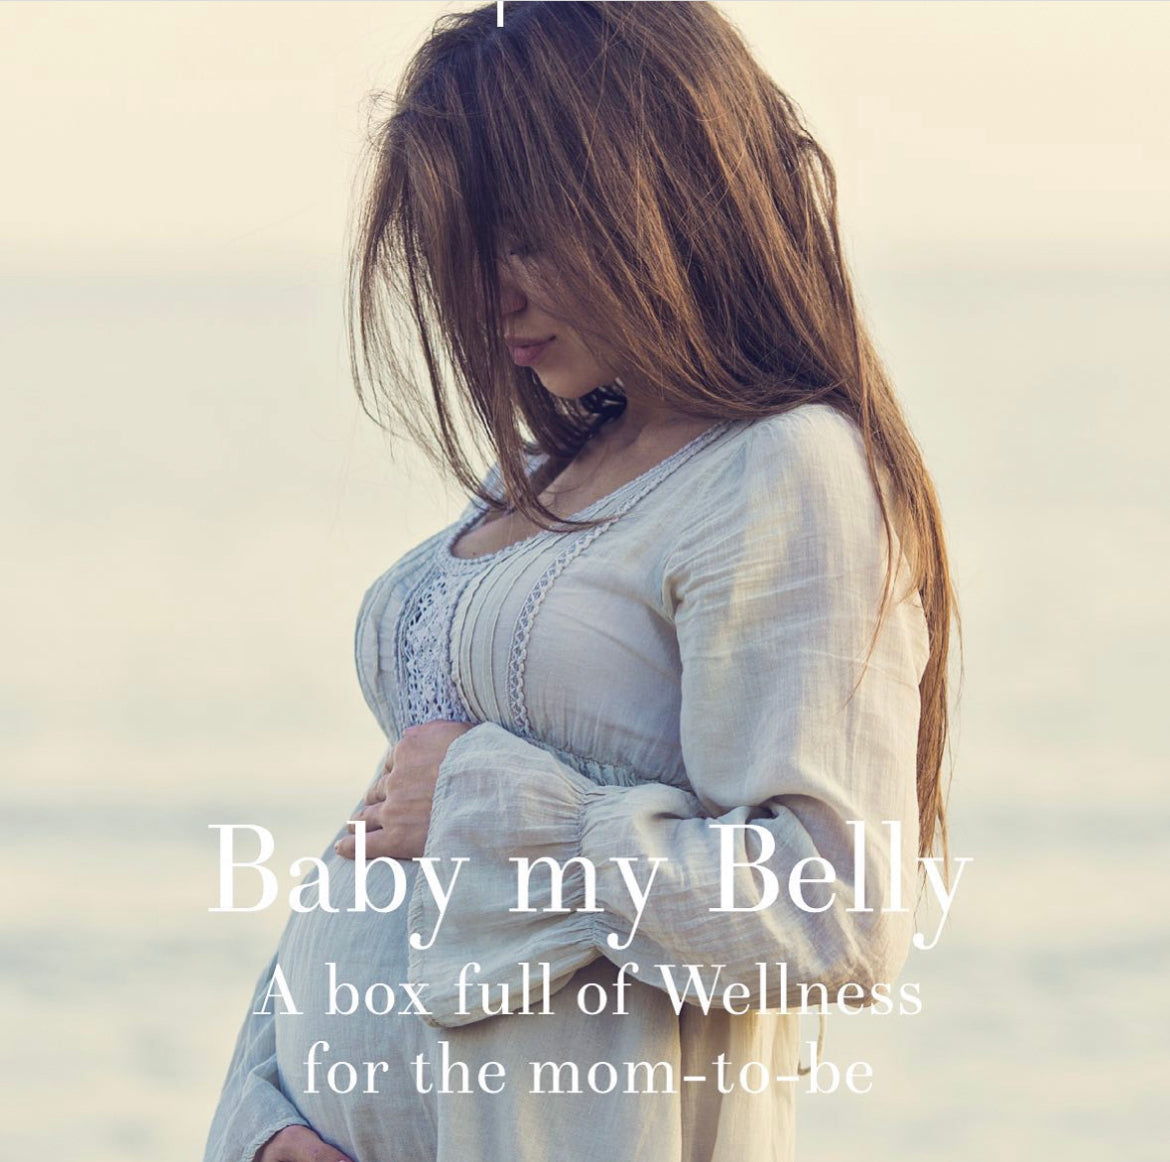 BABY MY BELLY - The Tides